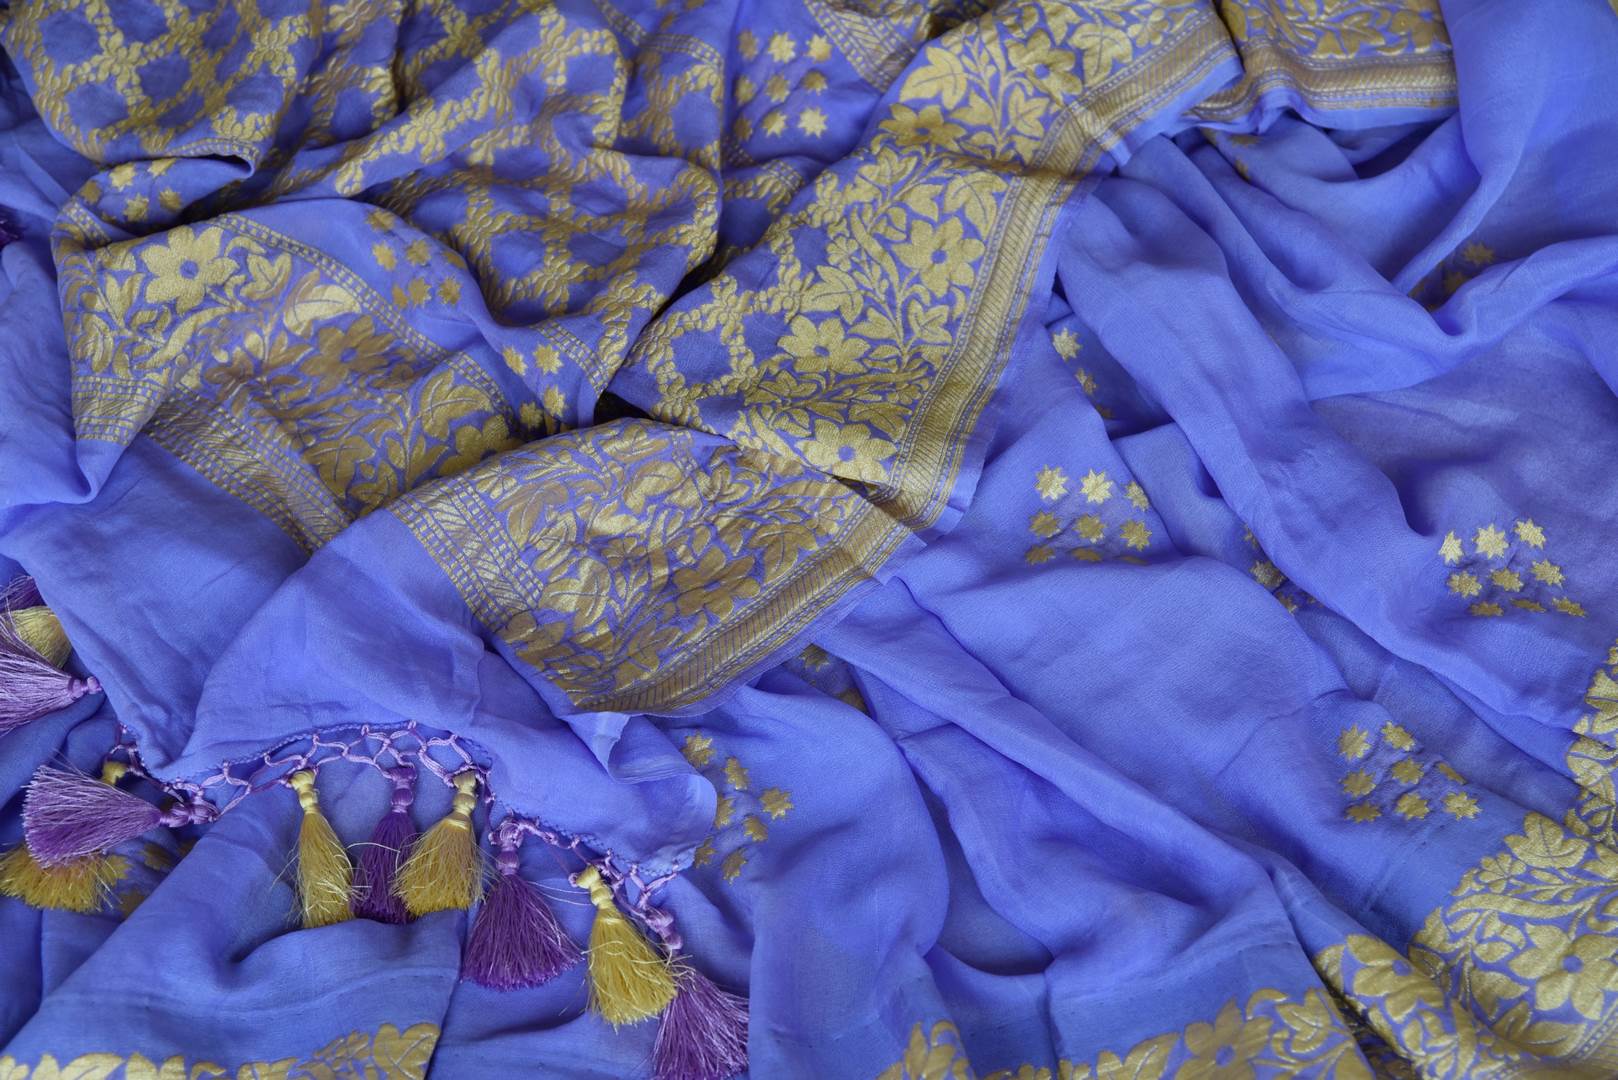 Buy mauve purple georgette Banarasi saree online in USA with silver foliate zari border. Elevate your traditional saree style with beautiful Indian Banarasi saris from Pure Elegance Indian fashion store in USA. We also have a stunning variety of bridal saris for Indian brides in USA. Shop now.-details